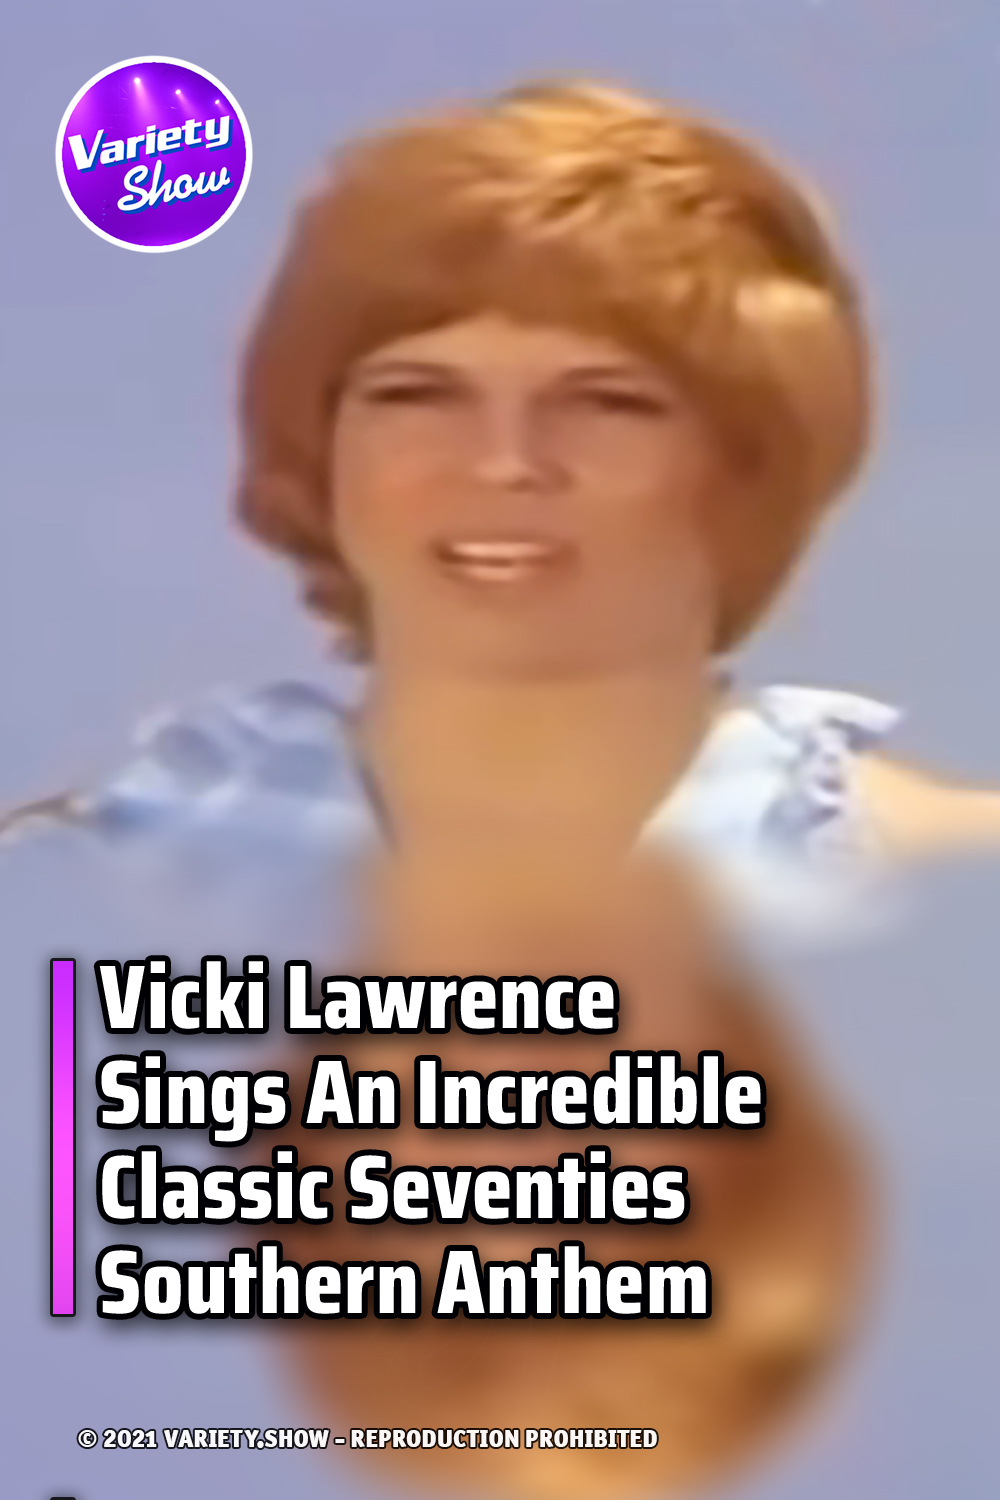 Vicki Lawrence Sings An Incredible Classic Seventies Southern Anthem